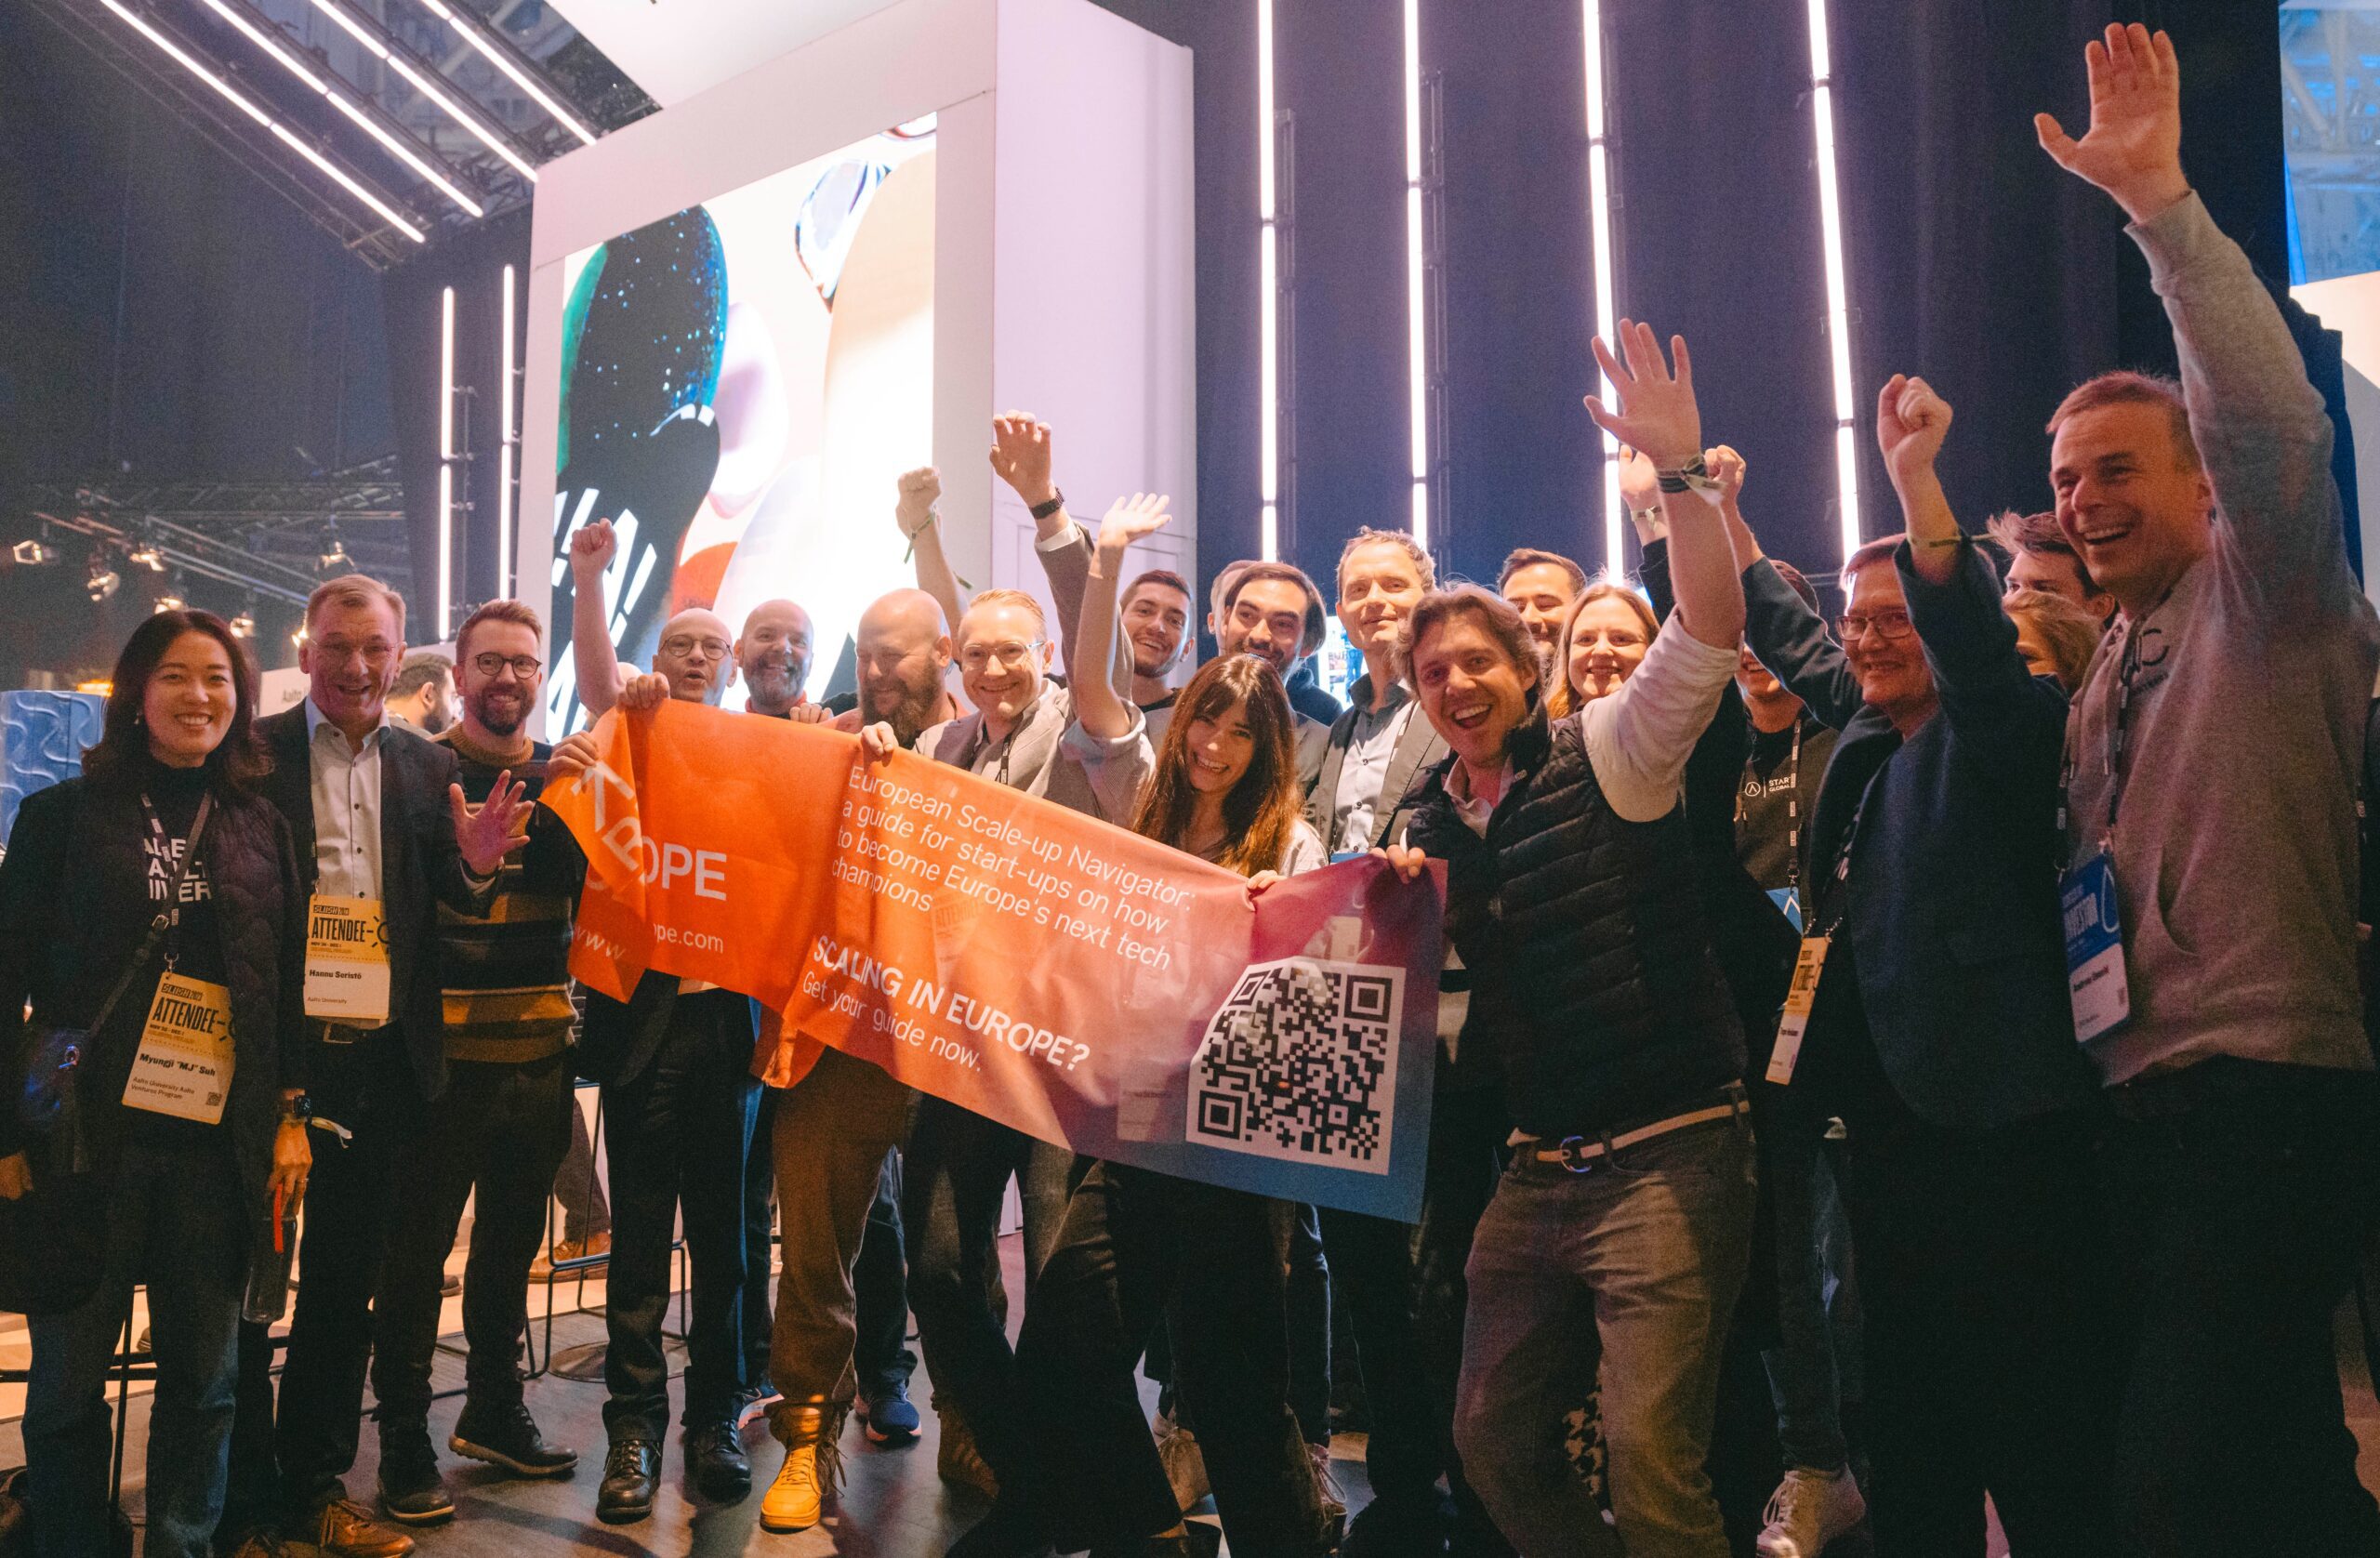 European Scale-up Navigator: A New Guide for Europe’s upcoming Tech Champions | Rise Europe